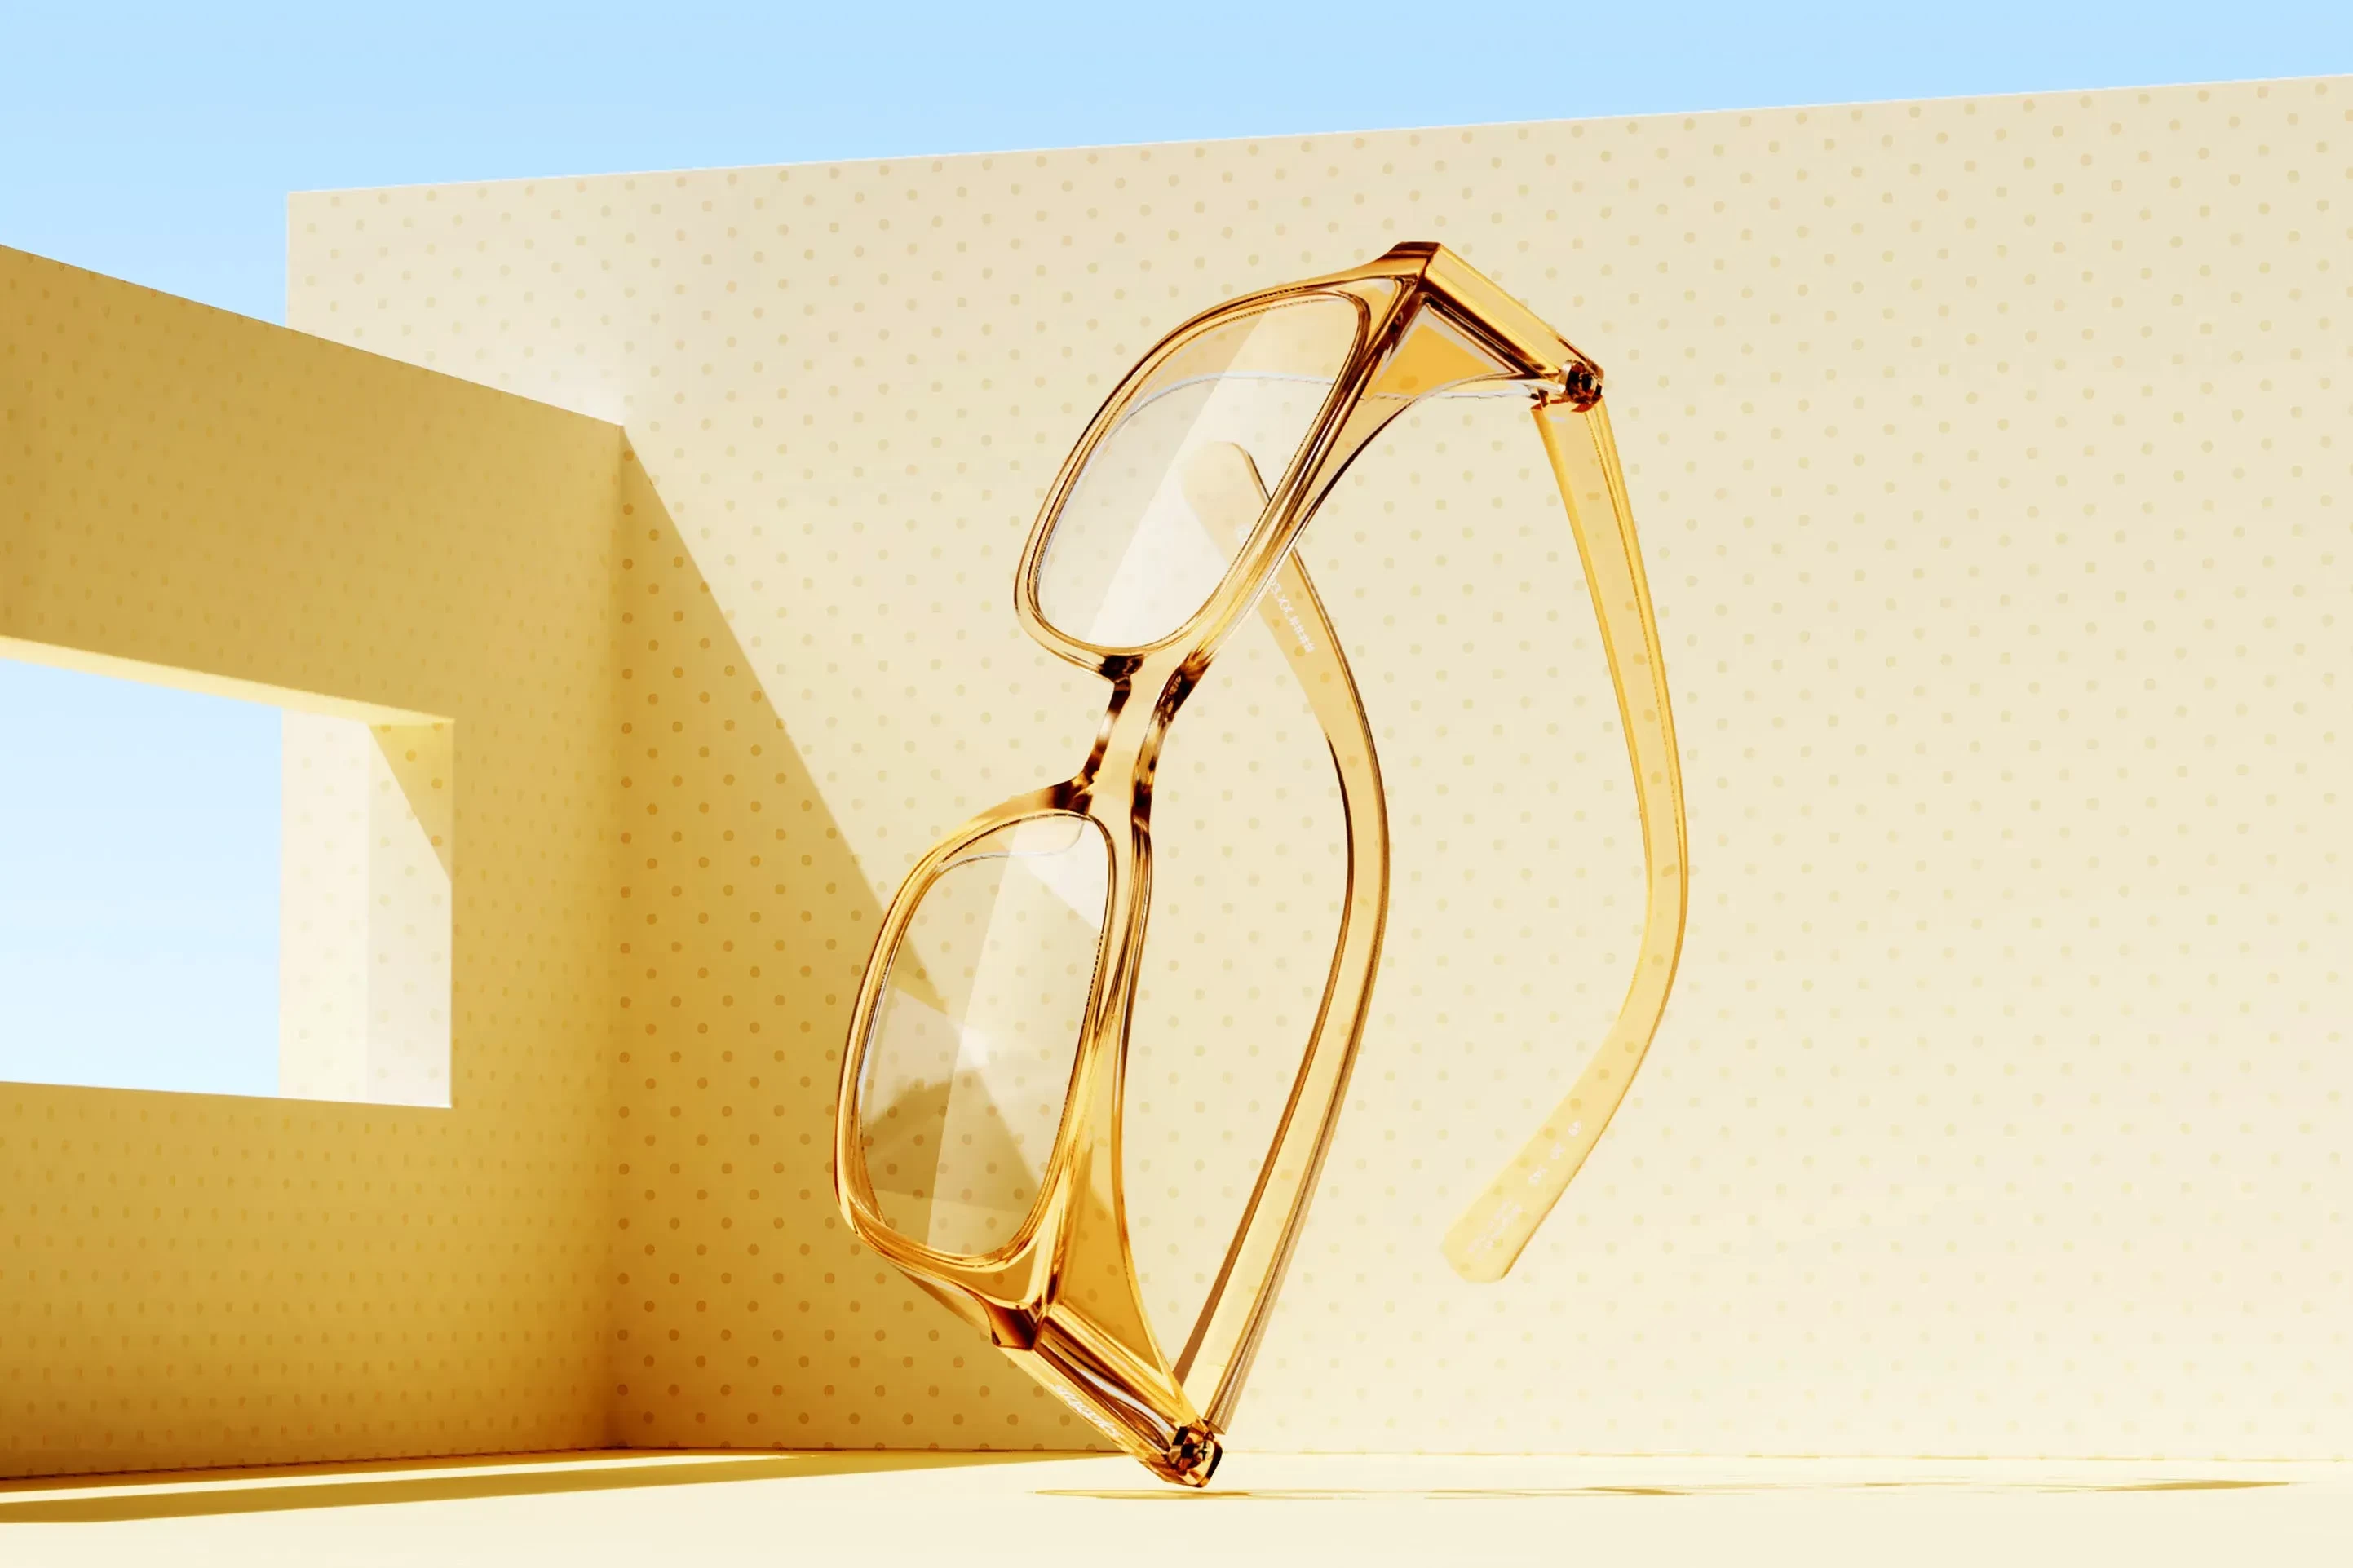 Promotional image of the gold Stoggles UV glasses